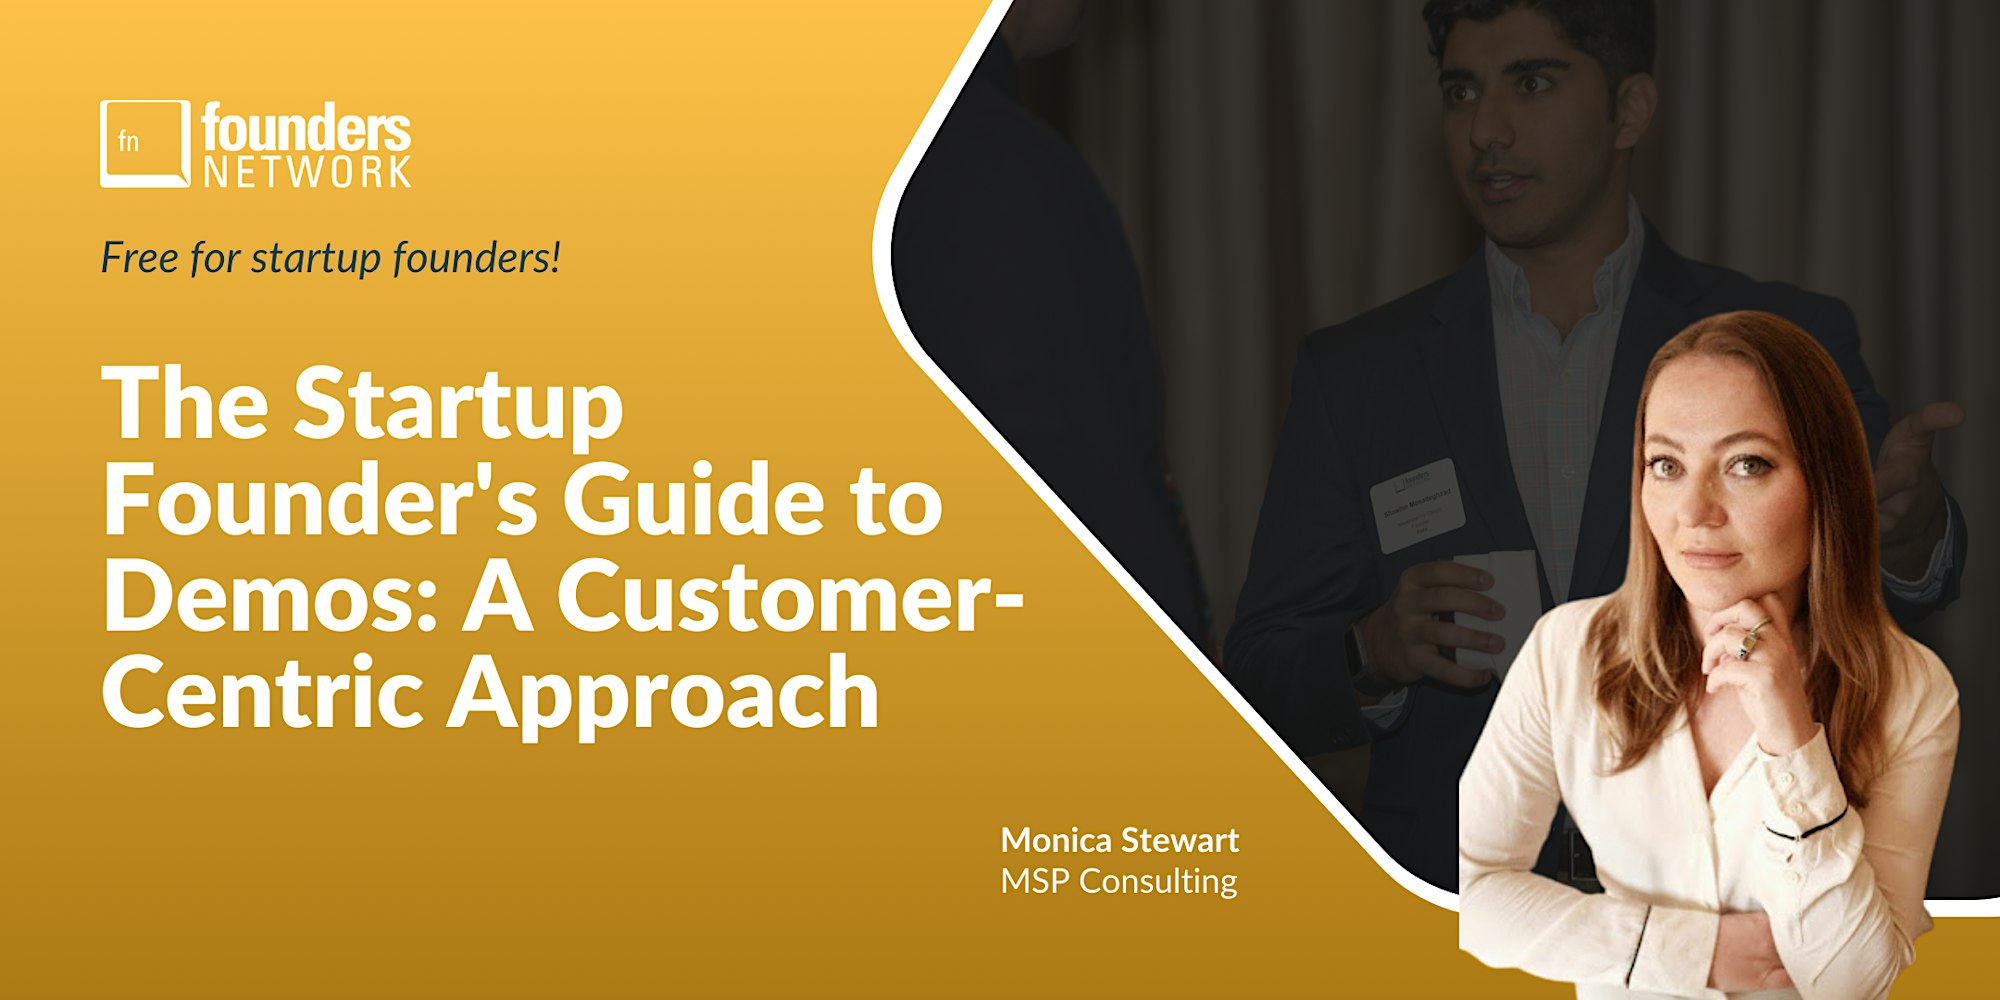 Featured image for “The Startup Founder’s Guide to Demos: A Customer-Centric Approach”